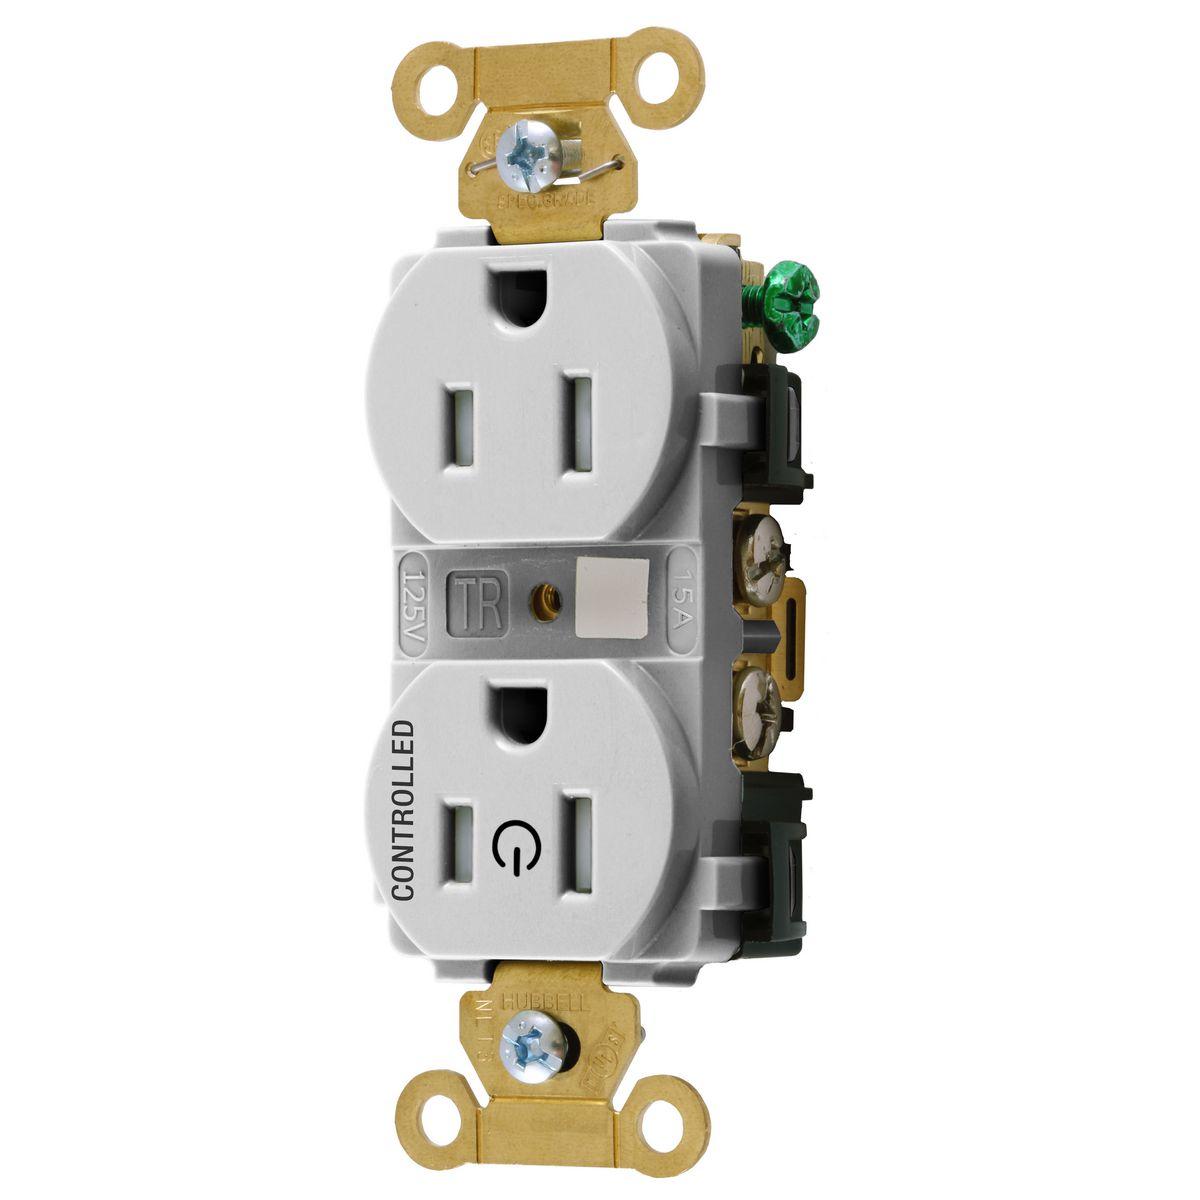 Hubbell HBL5262C1WHITR Straight Blade Devices,Extra Heavy Duty Standard Duplex Receptacles for Controlled Applications ,  Split Circuit,15A,125V, 2 Pole, 3 Wire Grounding,White  ; Permanently marked with universal power symbol and the word "CONTROLLED" to visually identify rece